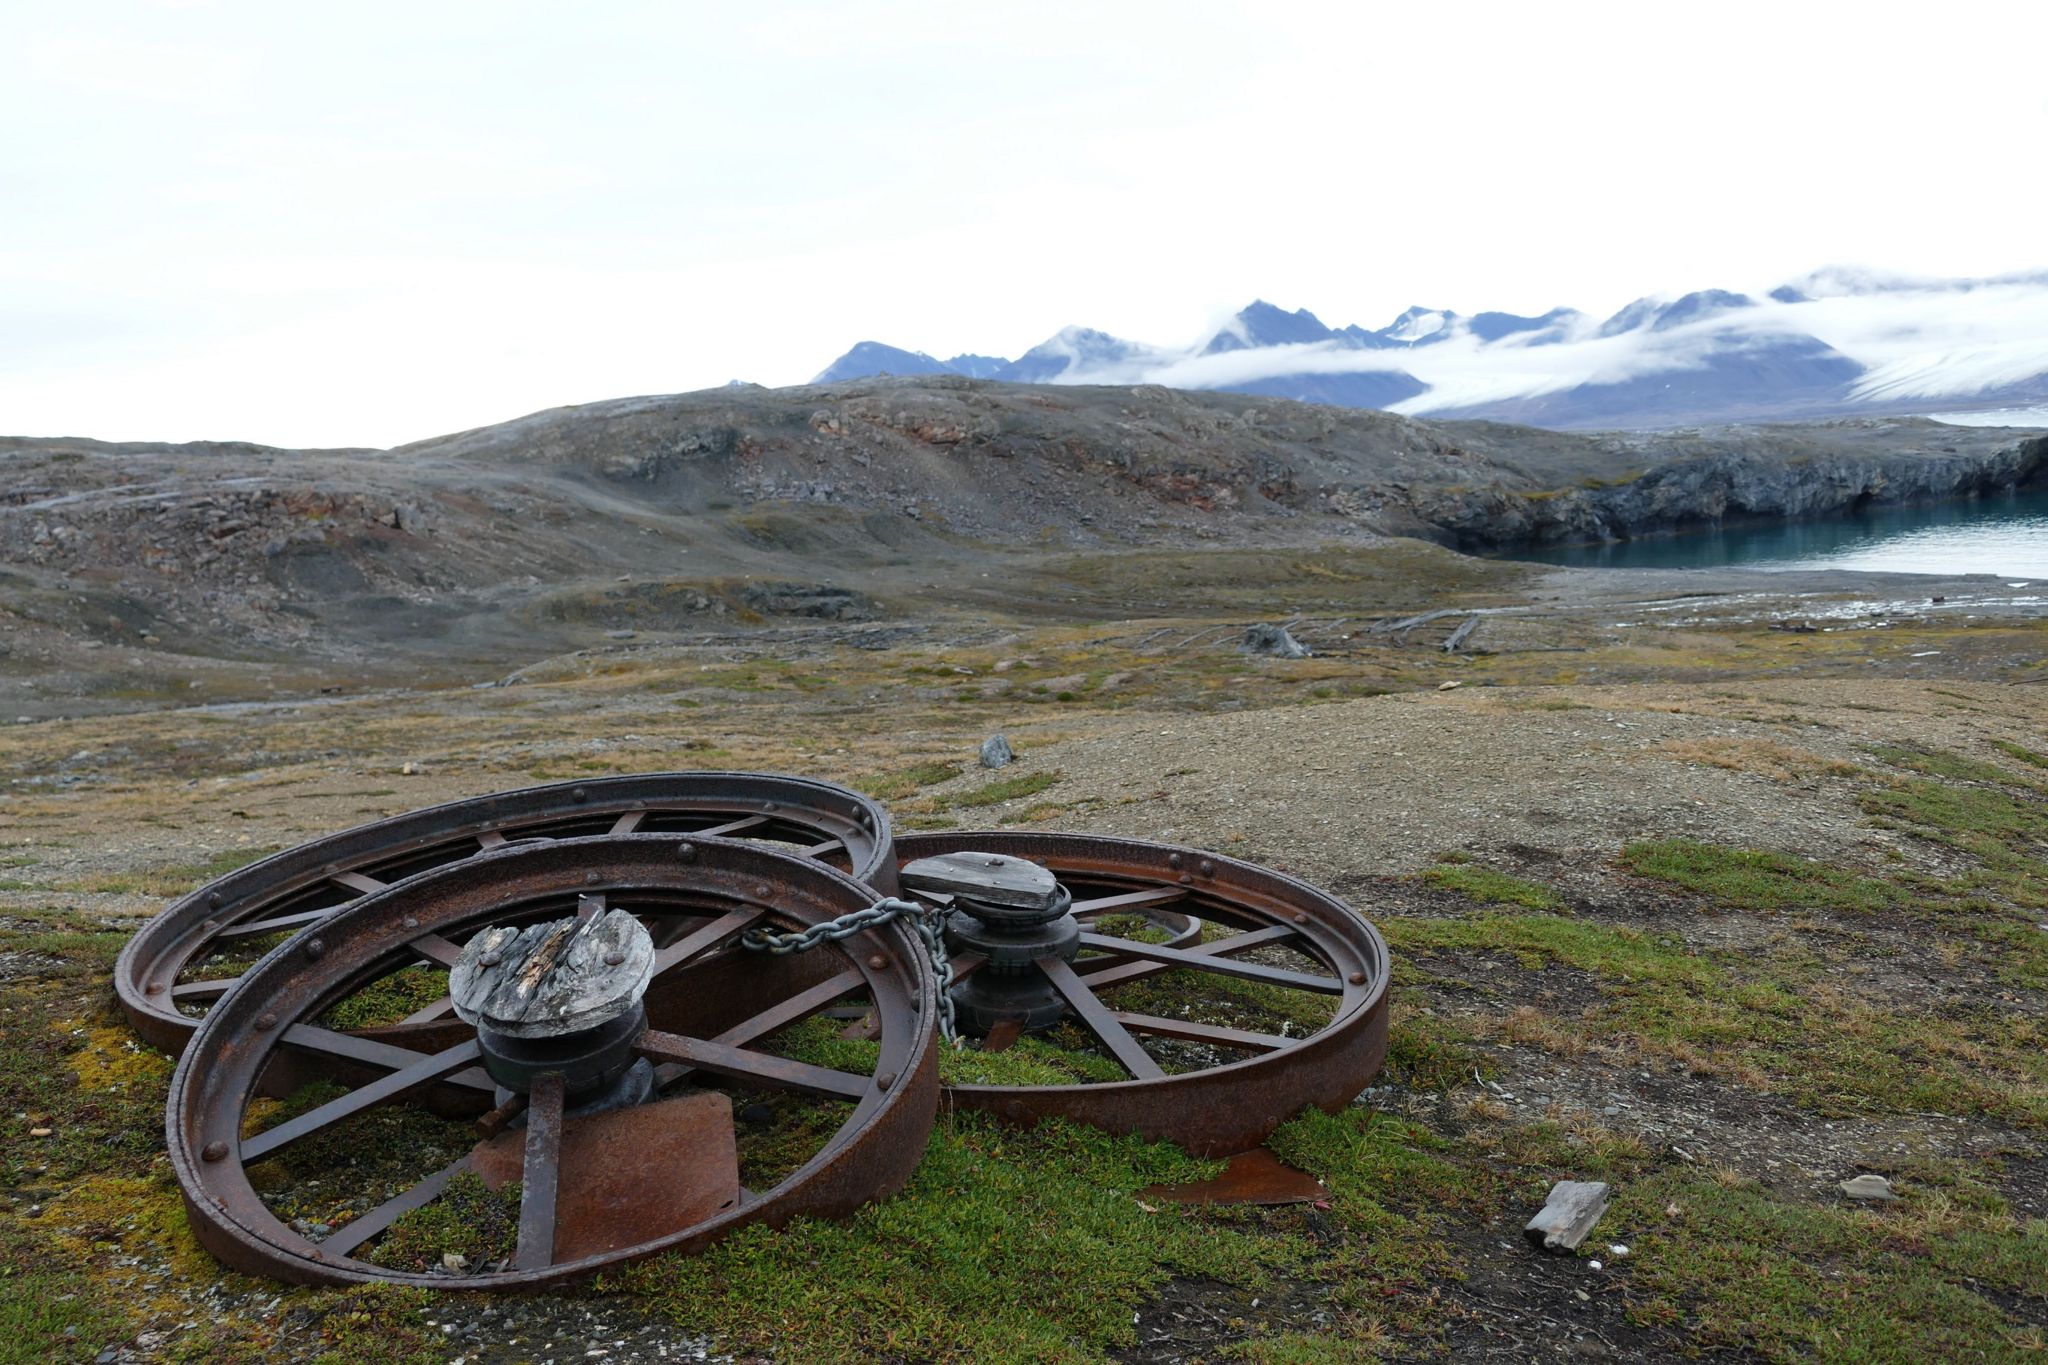 Abandoned wheels at the site of former mining settlement in the Svalbard archipelago's Arctic island of Blomstrandøya